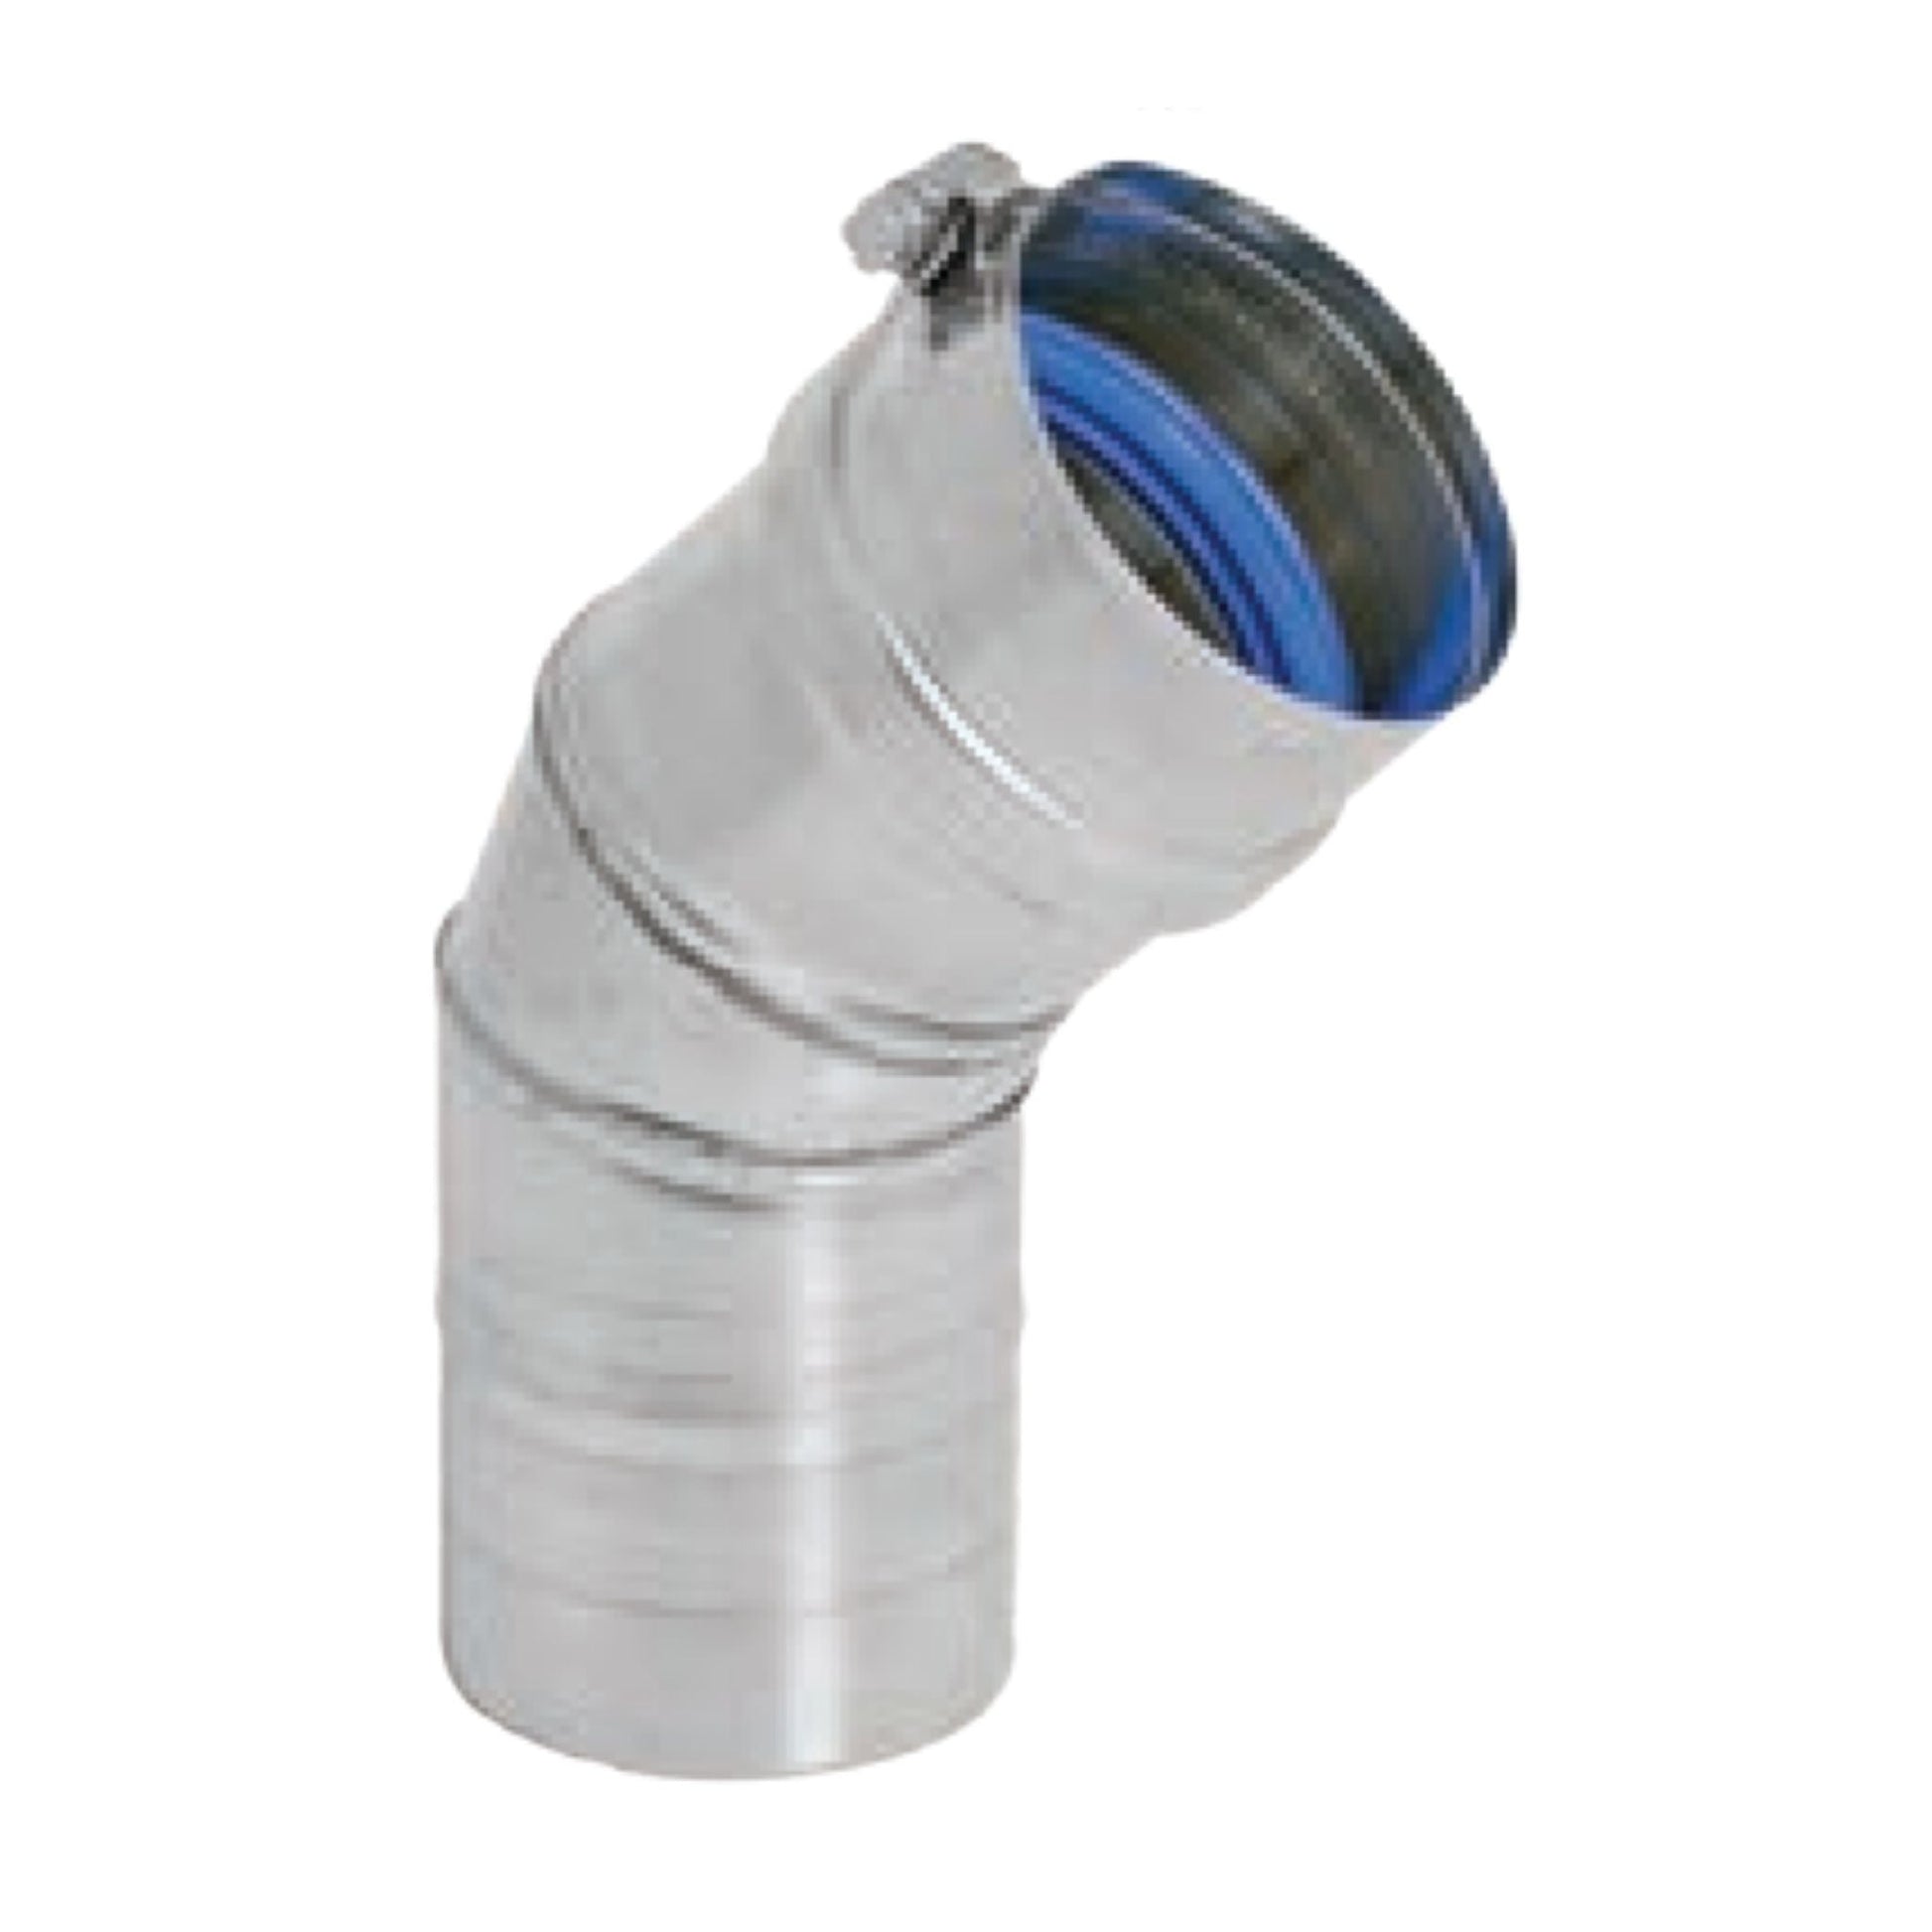 DuraVent FasNSeal 6" 45 Degree 316L Stainless Steel Elbow